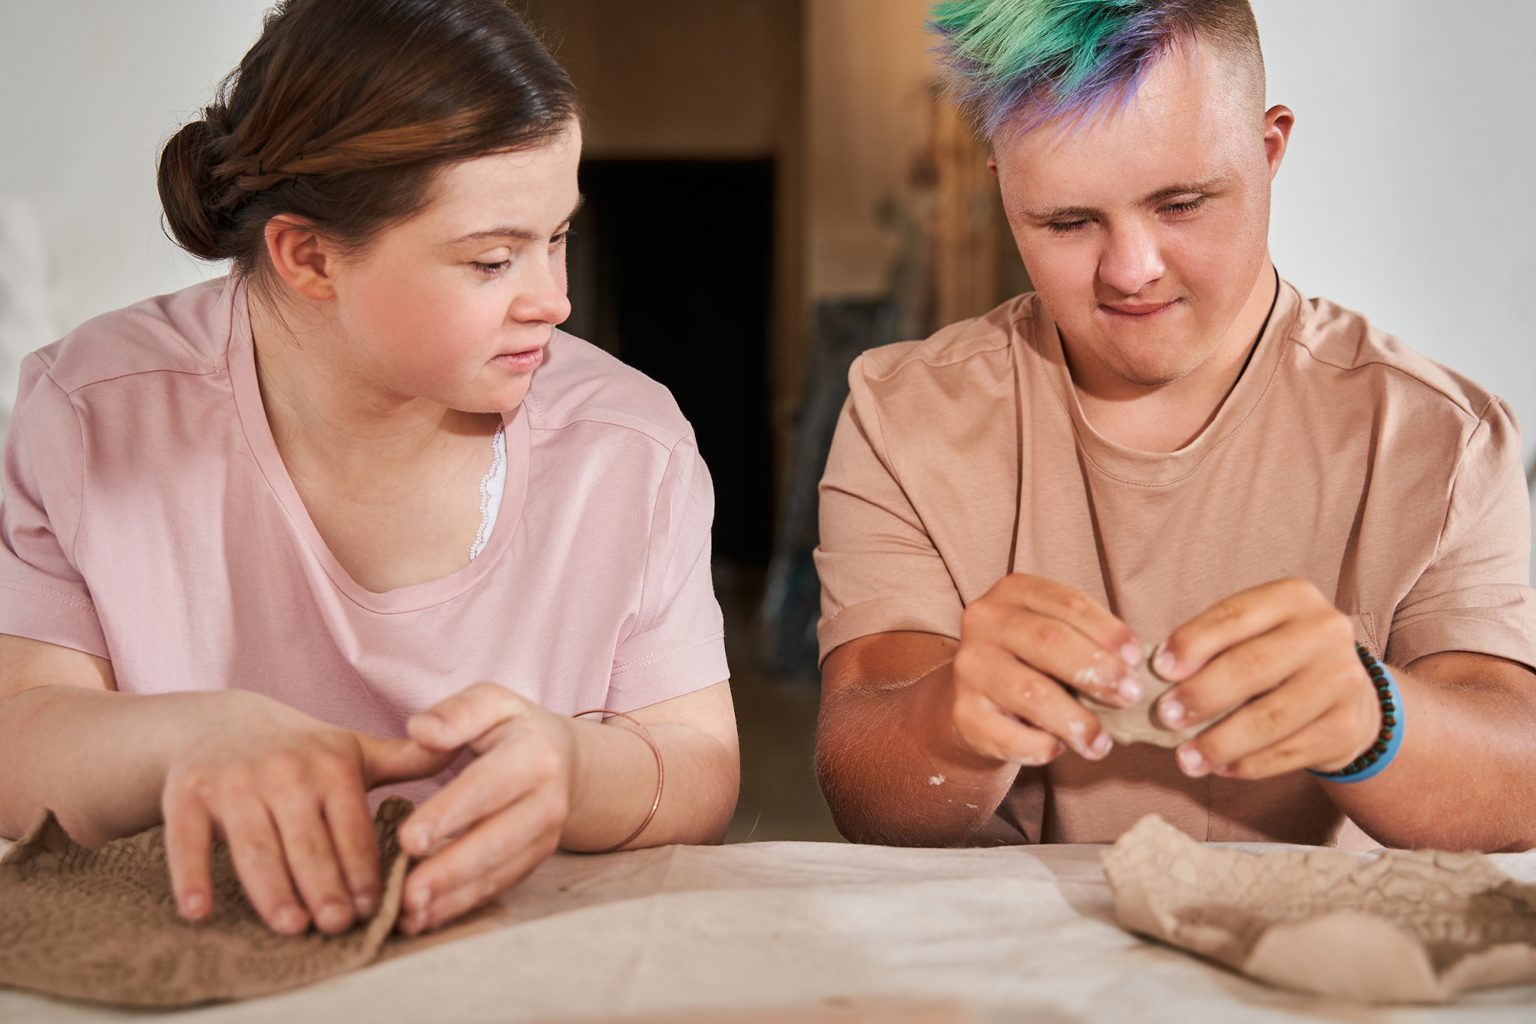 Teens with down syndrome looking at the each other while making dishes from clay